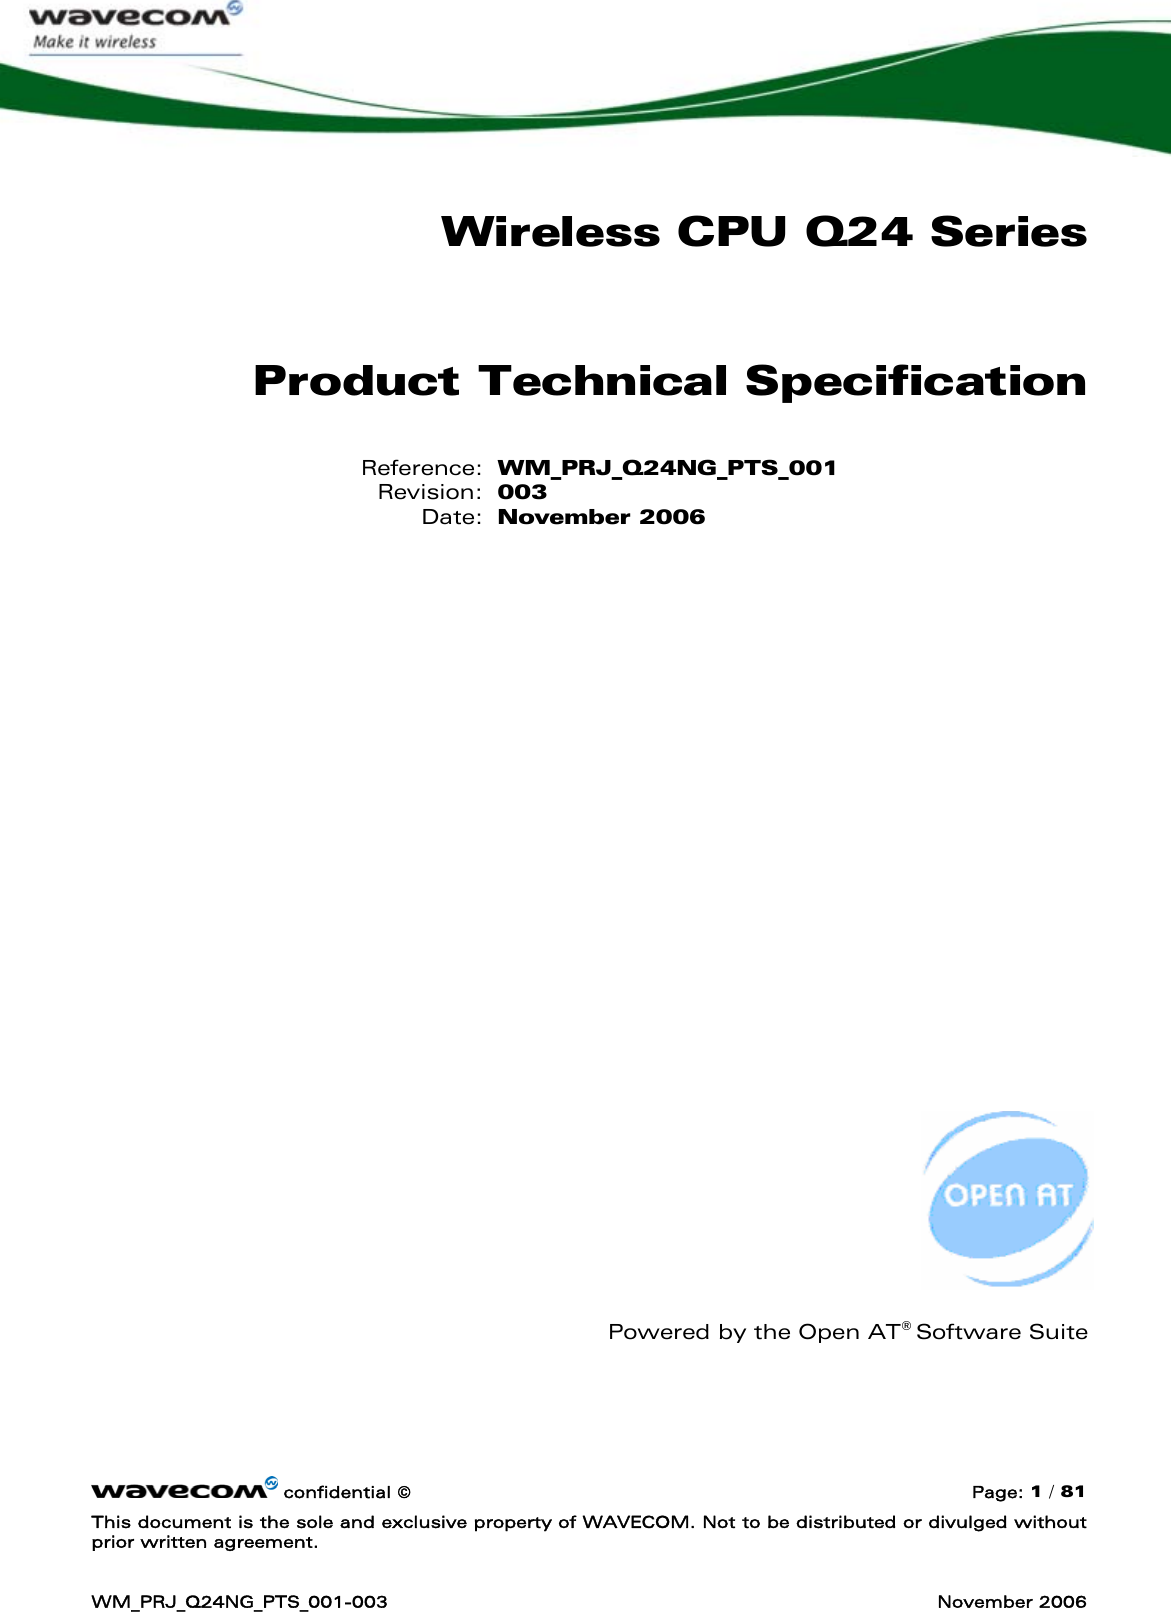      confidential © Page: 1 / 81 This document is the sole and exclusive property of WAVECOM. Not to be distributed or divulged without prior written agreement.  WM_PRJ_Q24NG_PTS_001-003  November 2006  Wireless CPU Q24 Series Product Technical Specification Reference: WM_PRJ_Q24NG_PTS_001 Revision: 003 Date: November 2006                           Powered by the Open AT® Software Suite    